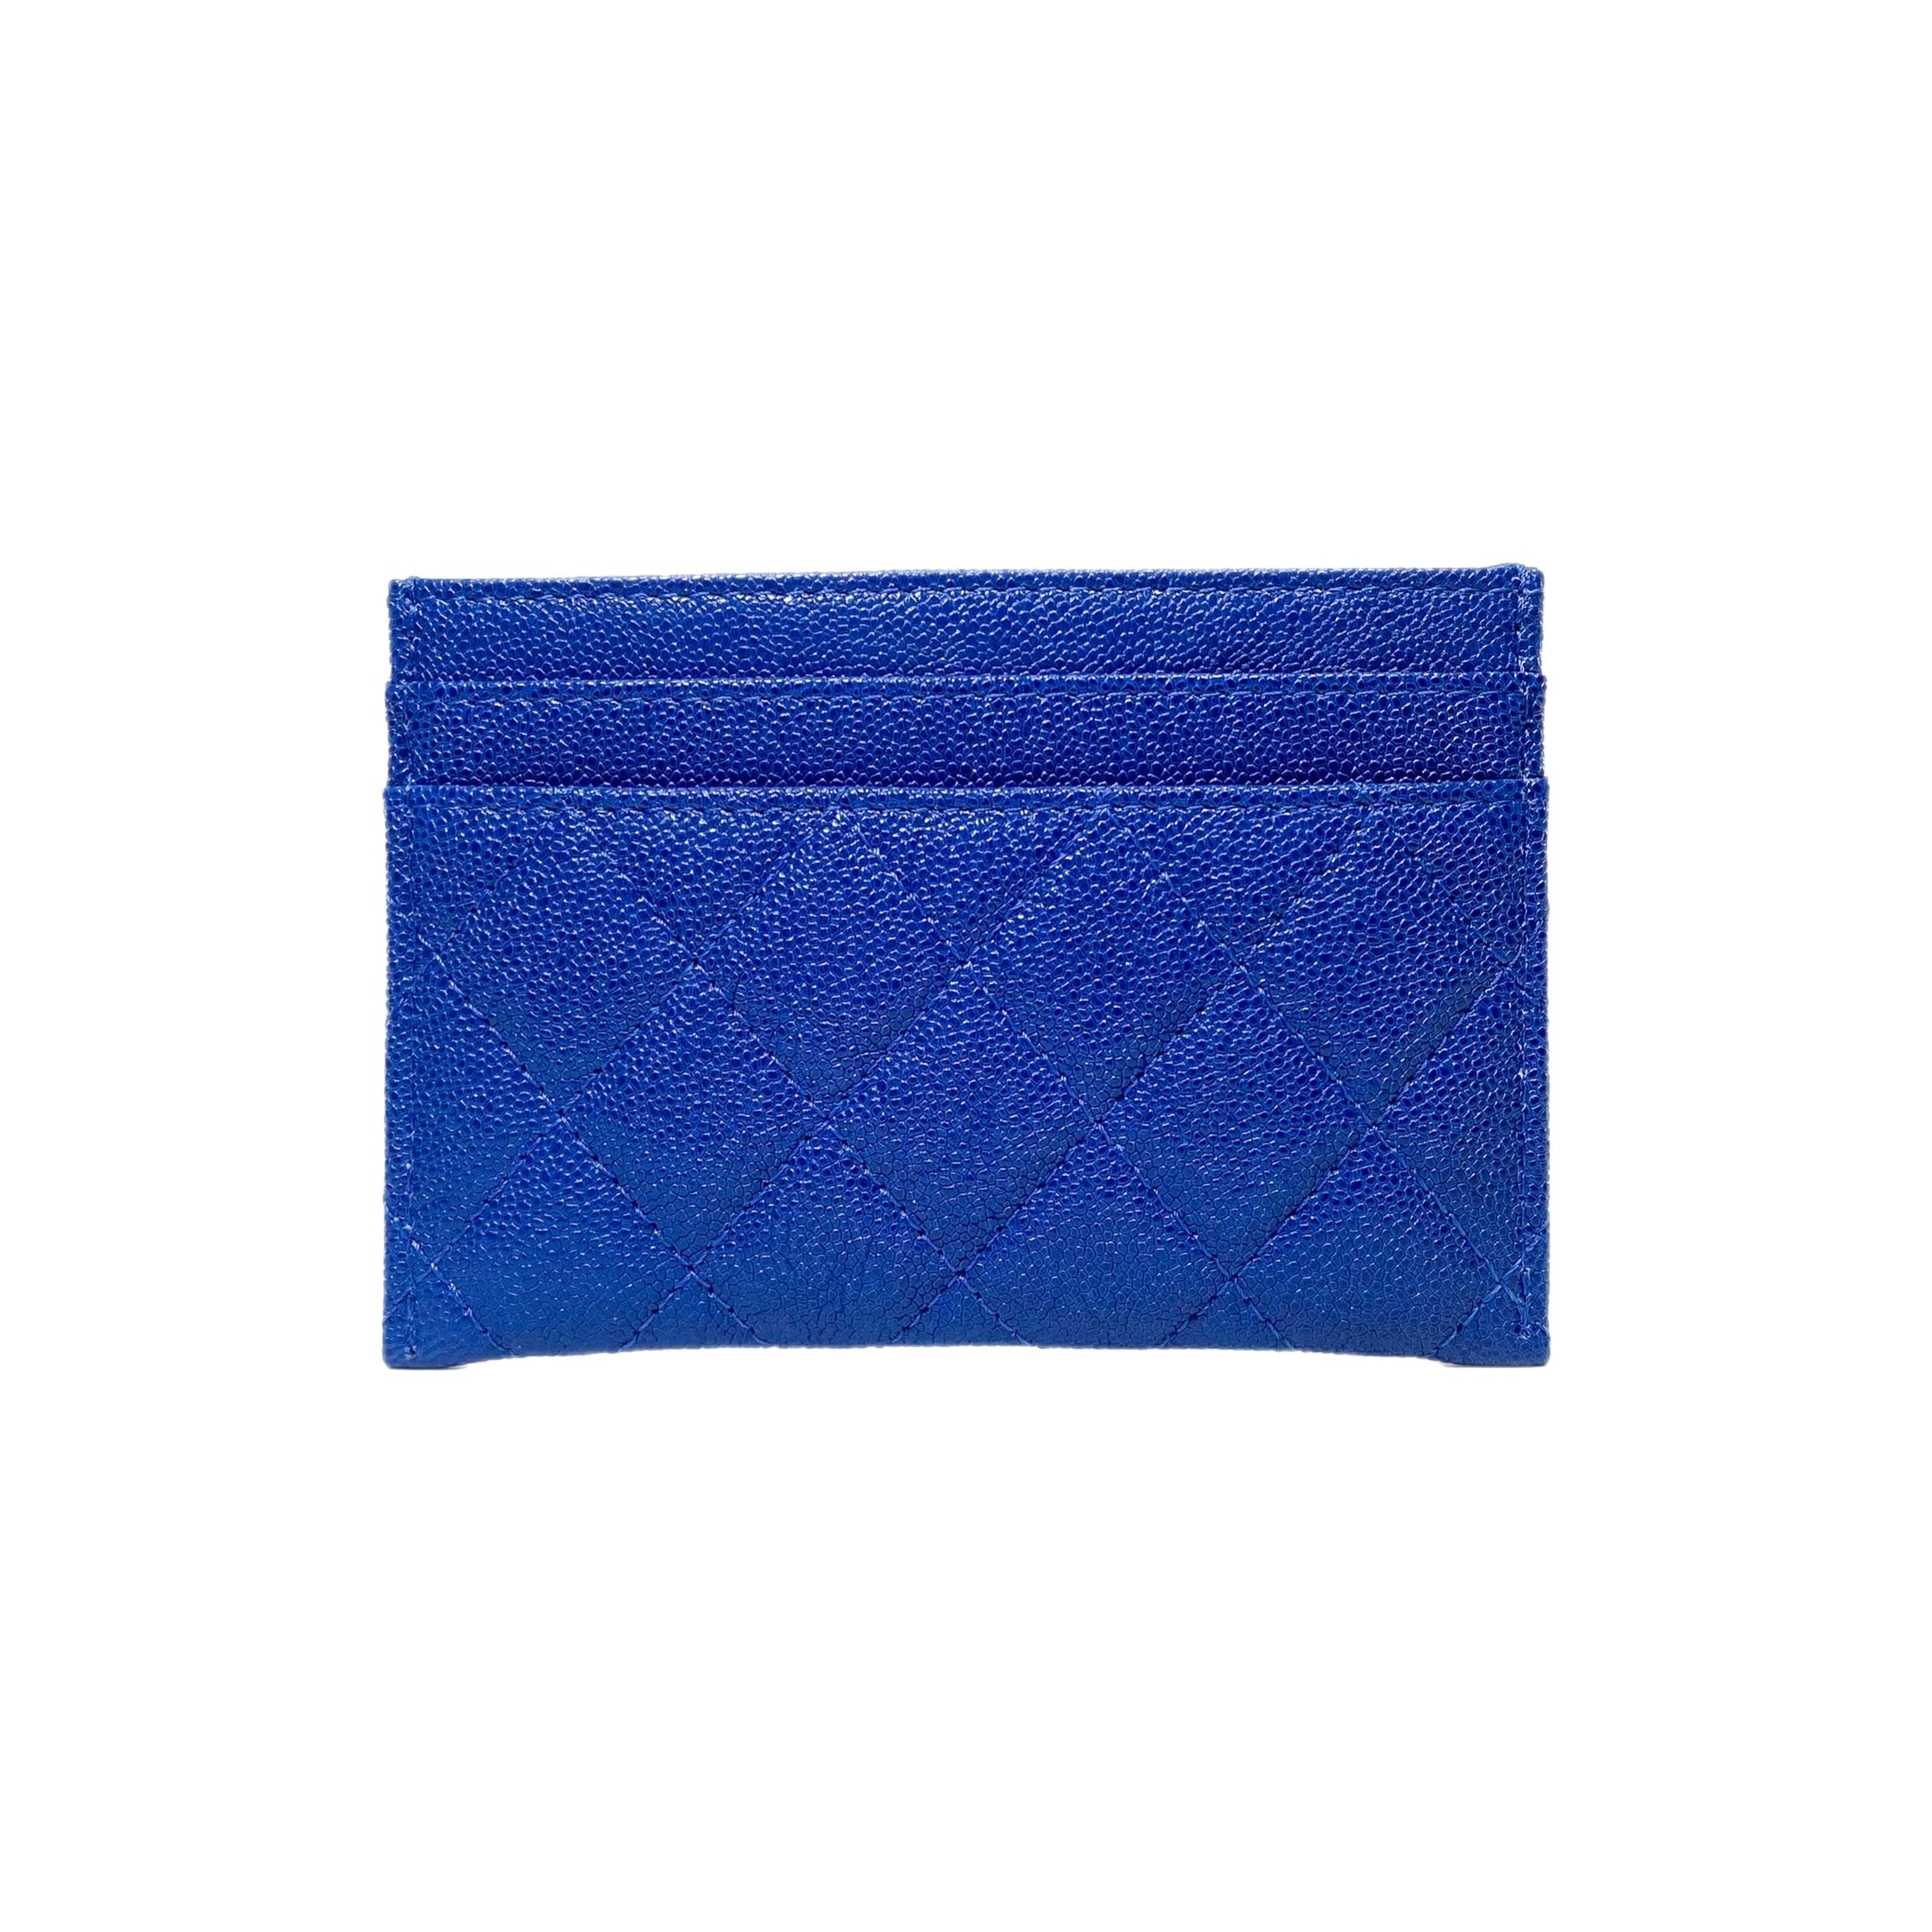 Chanel Blue Quilted Caviar Boy Card Case